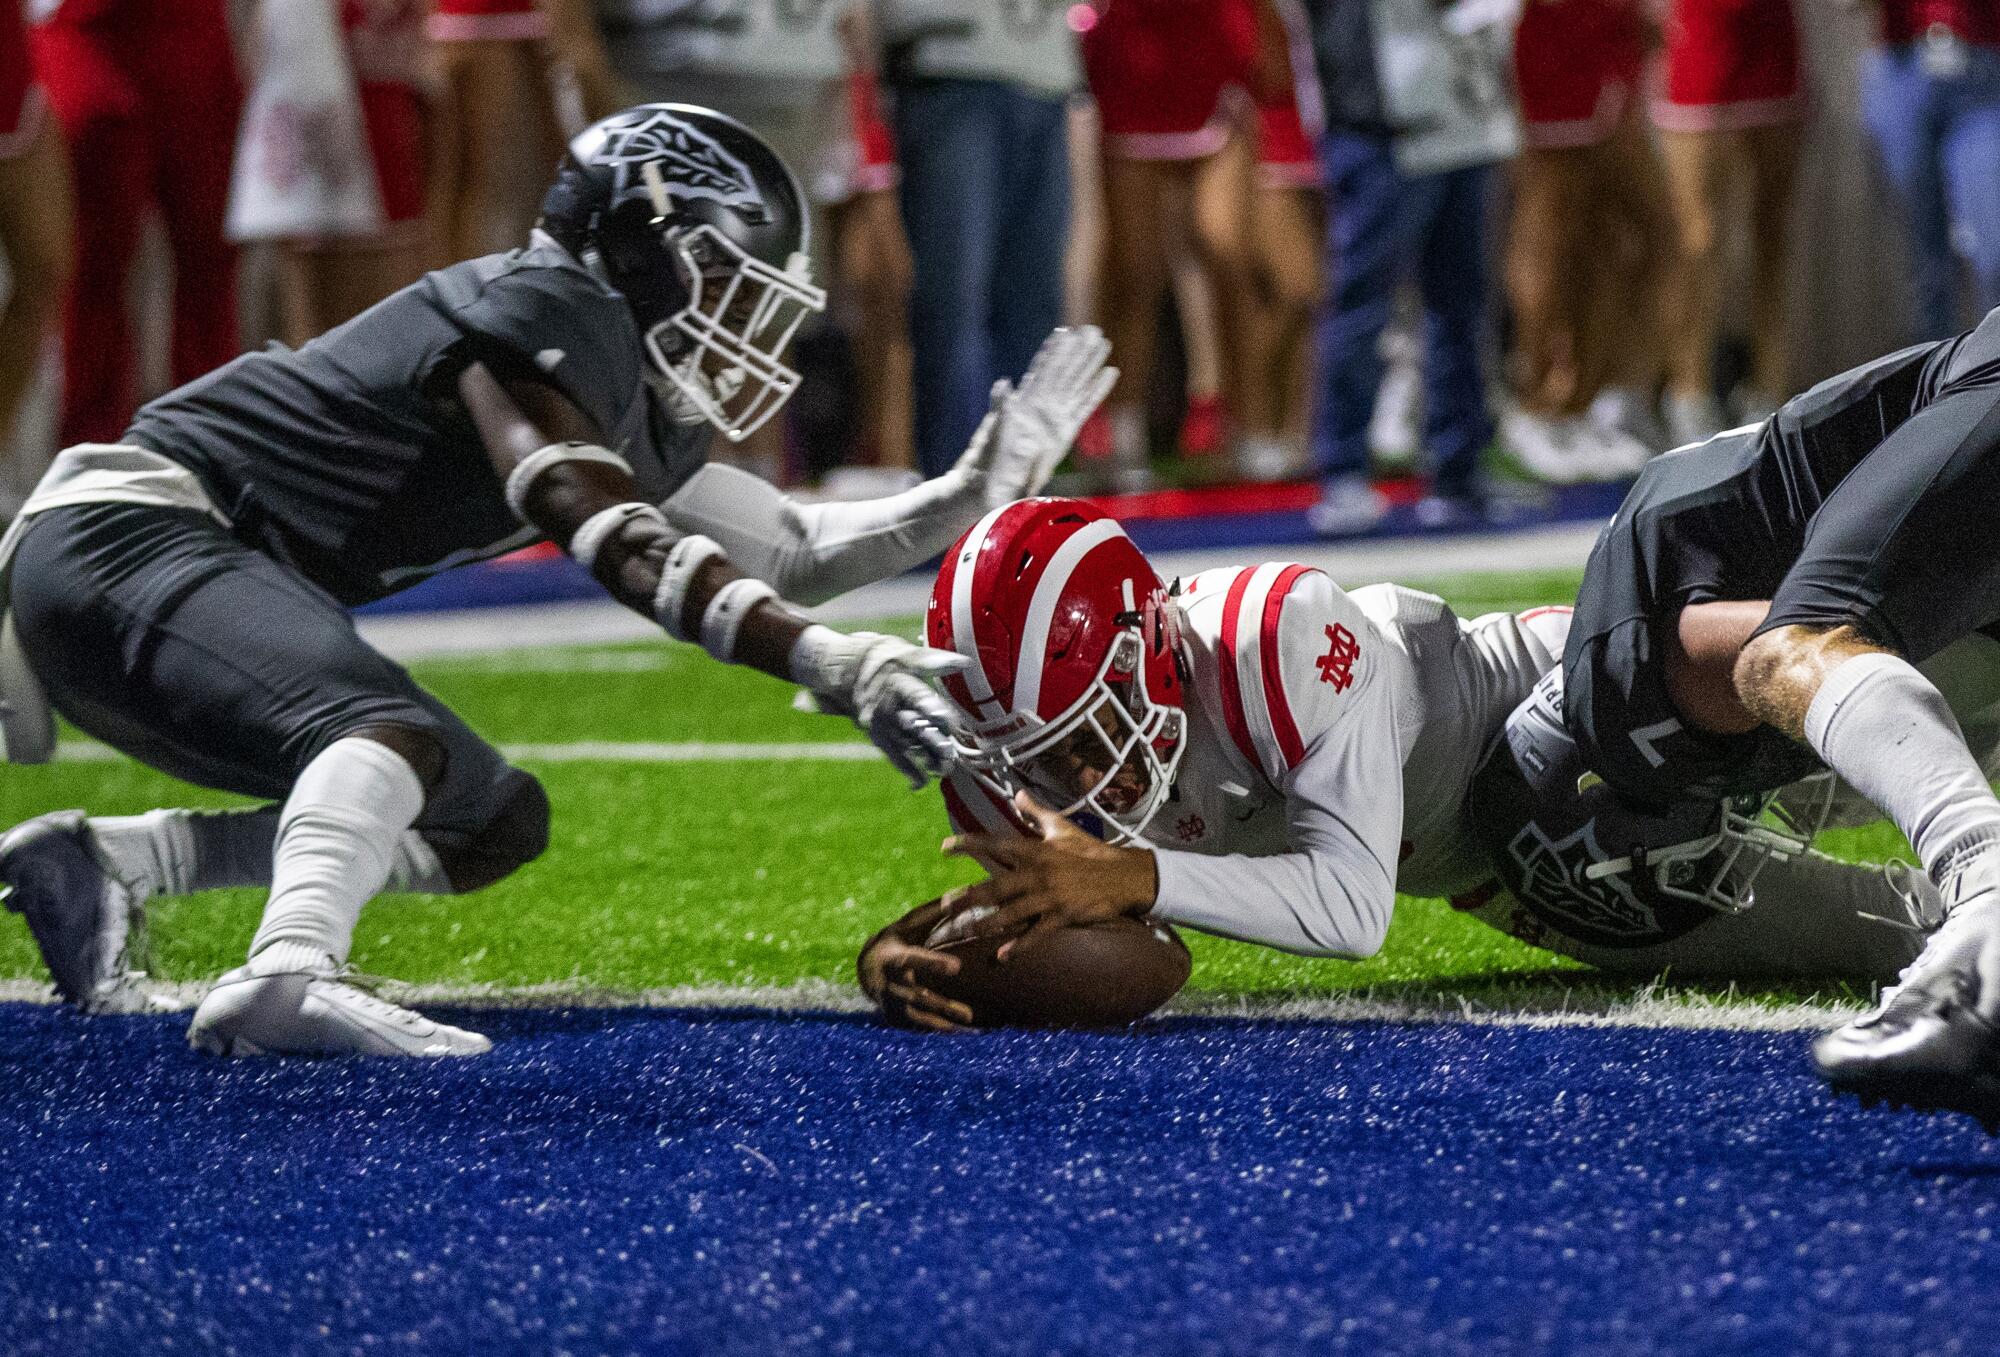 Bryce Young dives into the end zone to score a touchdown for Mater Dei against rival St. John Bosco.